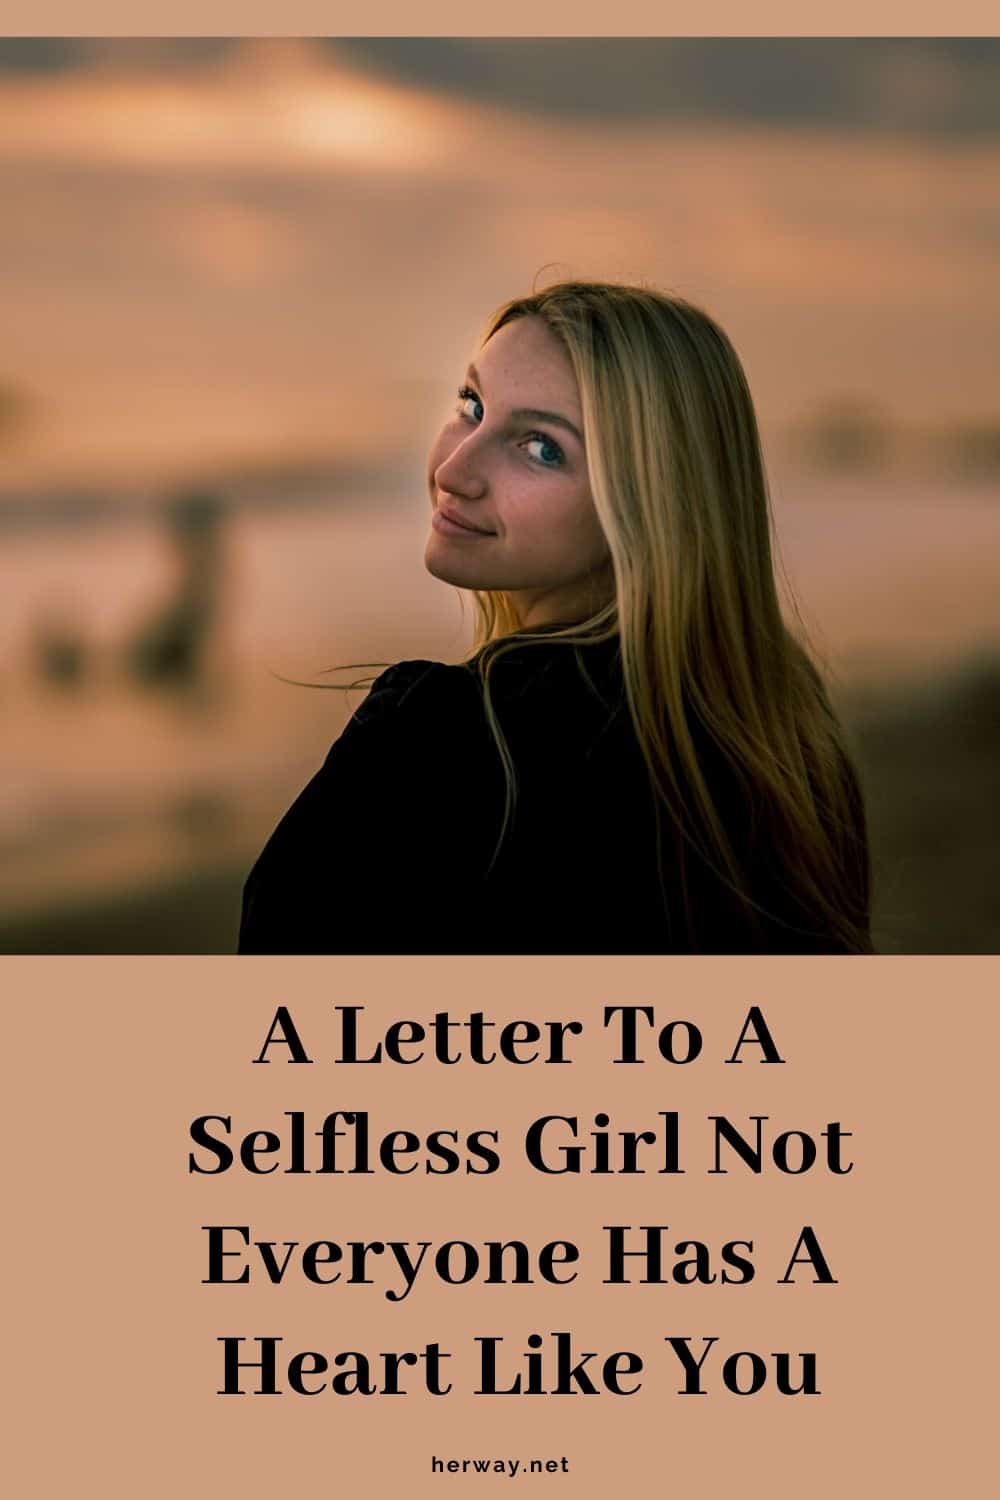 A Letter To A Selfless Girl Not Everyone Has A Heart Like You